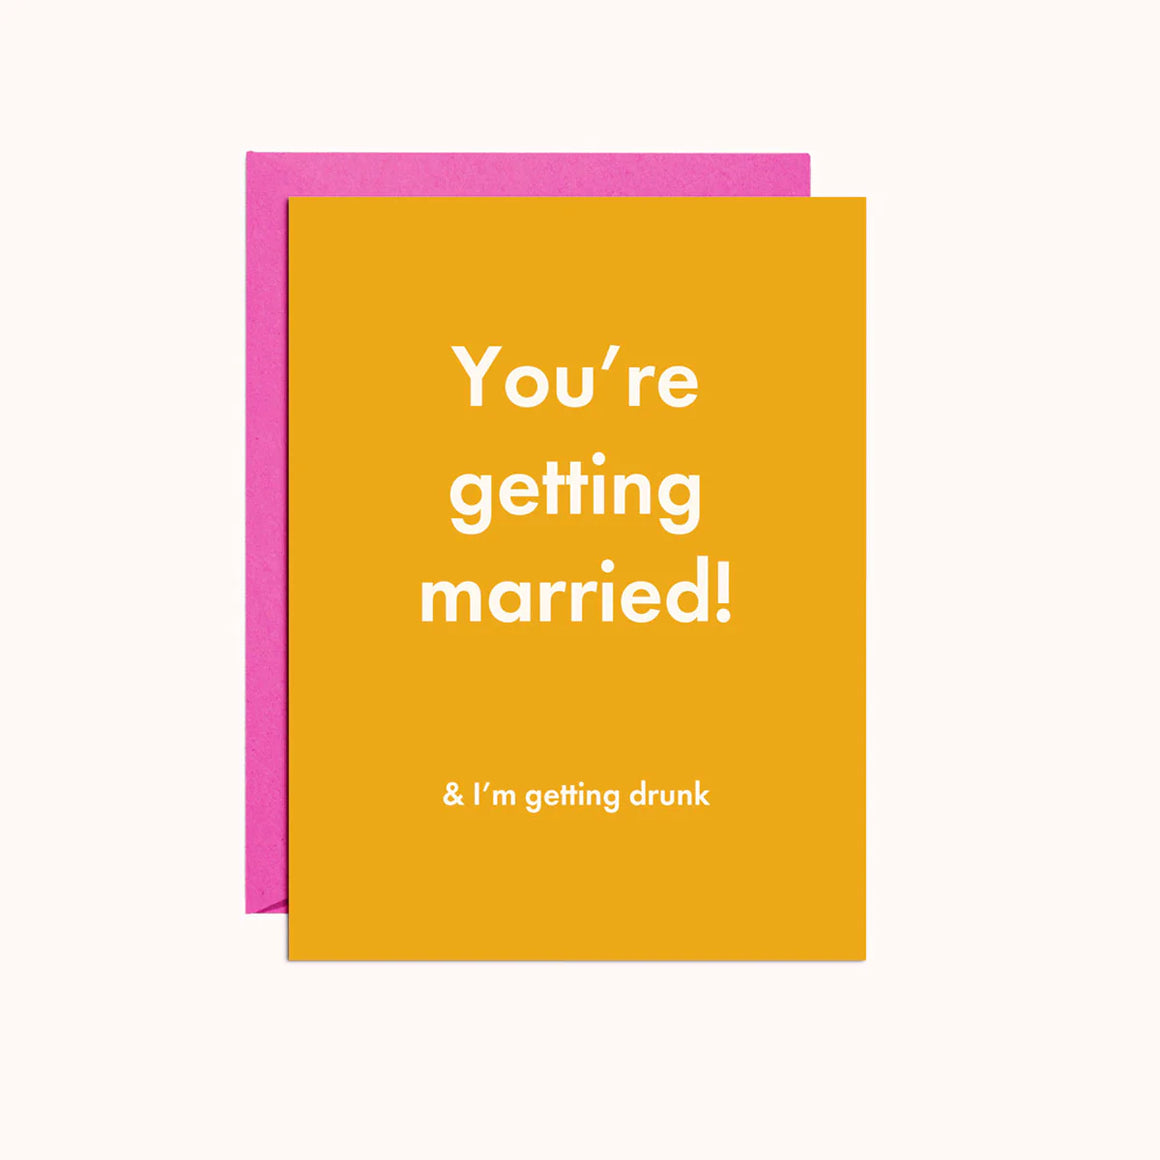 Married and drunk Greeting Card